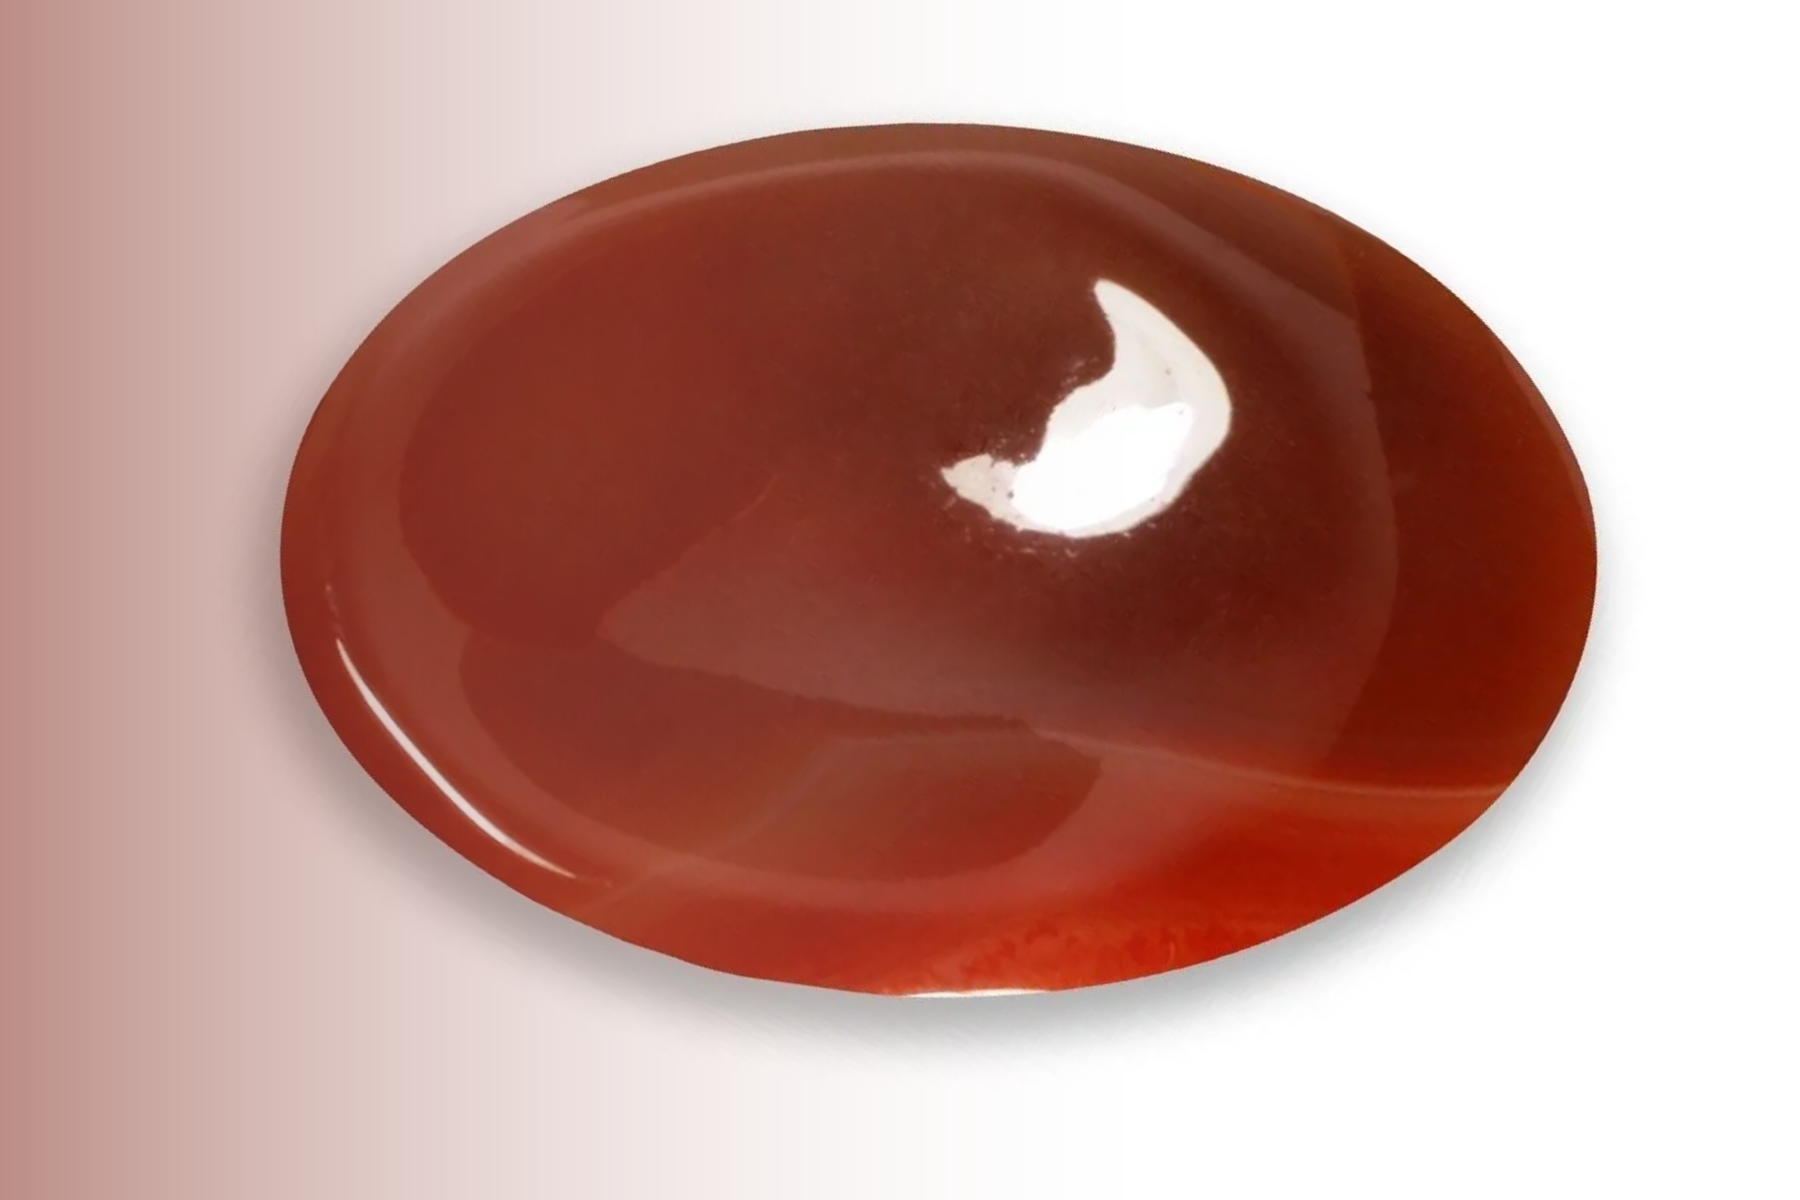 Carnelian stone, oblong, and gleaming